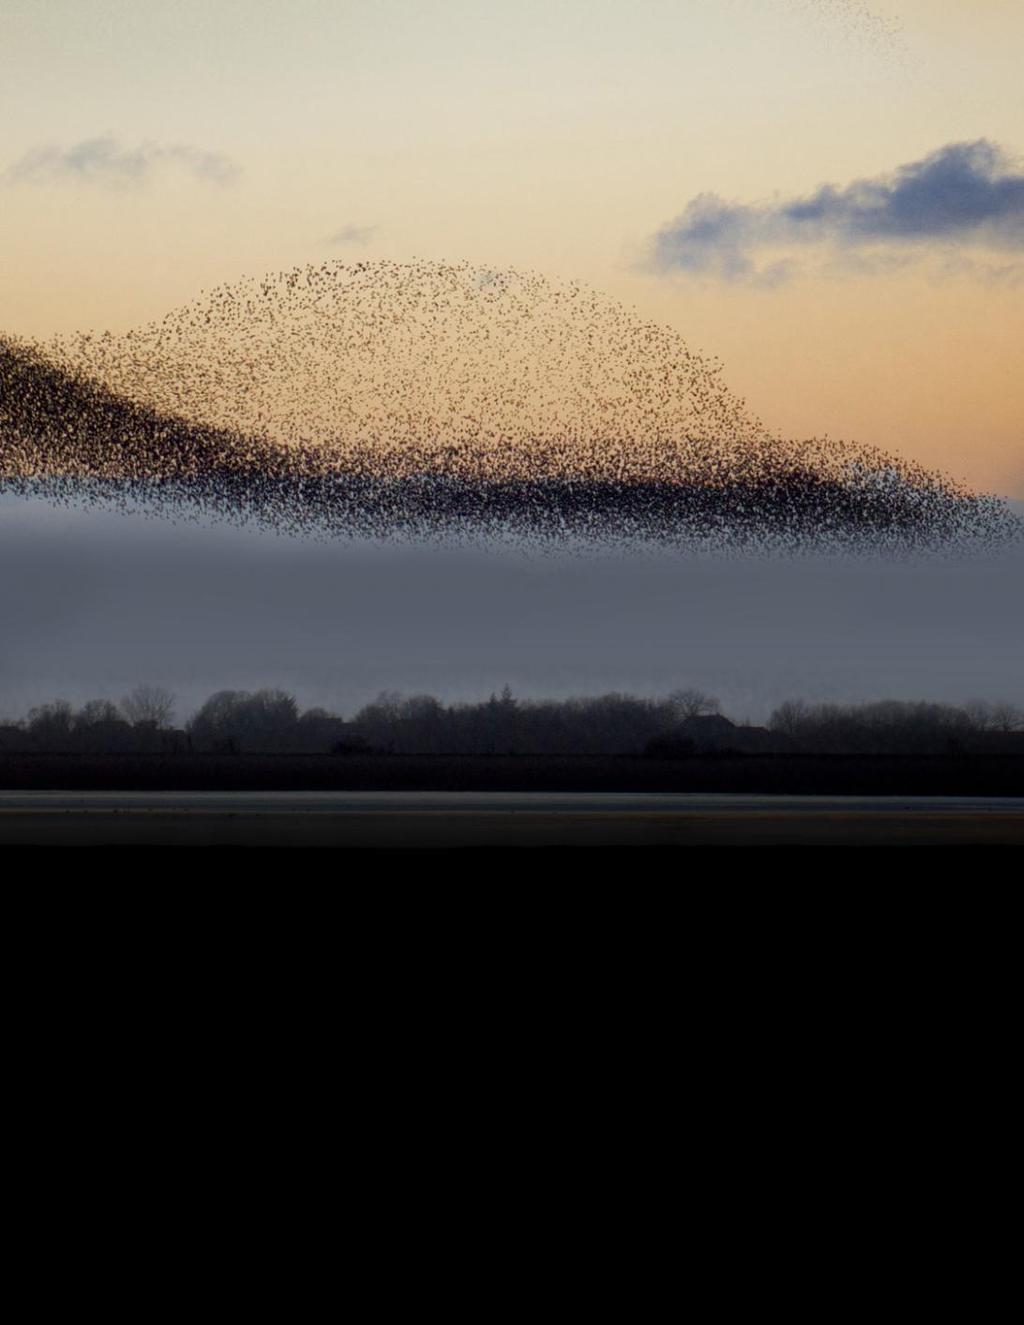 Murmuration is a phenomenon that results when hundreds, sometimes thousands, of starlings fly in swooping, pivoting coordinated moves through the sky. Always in agile unison.